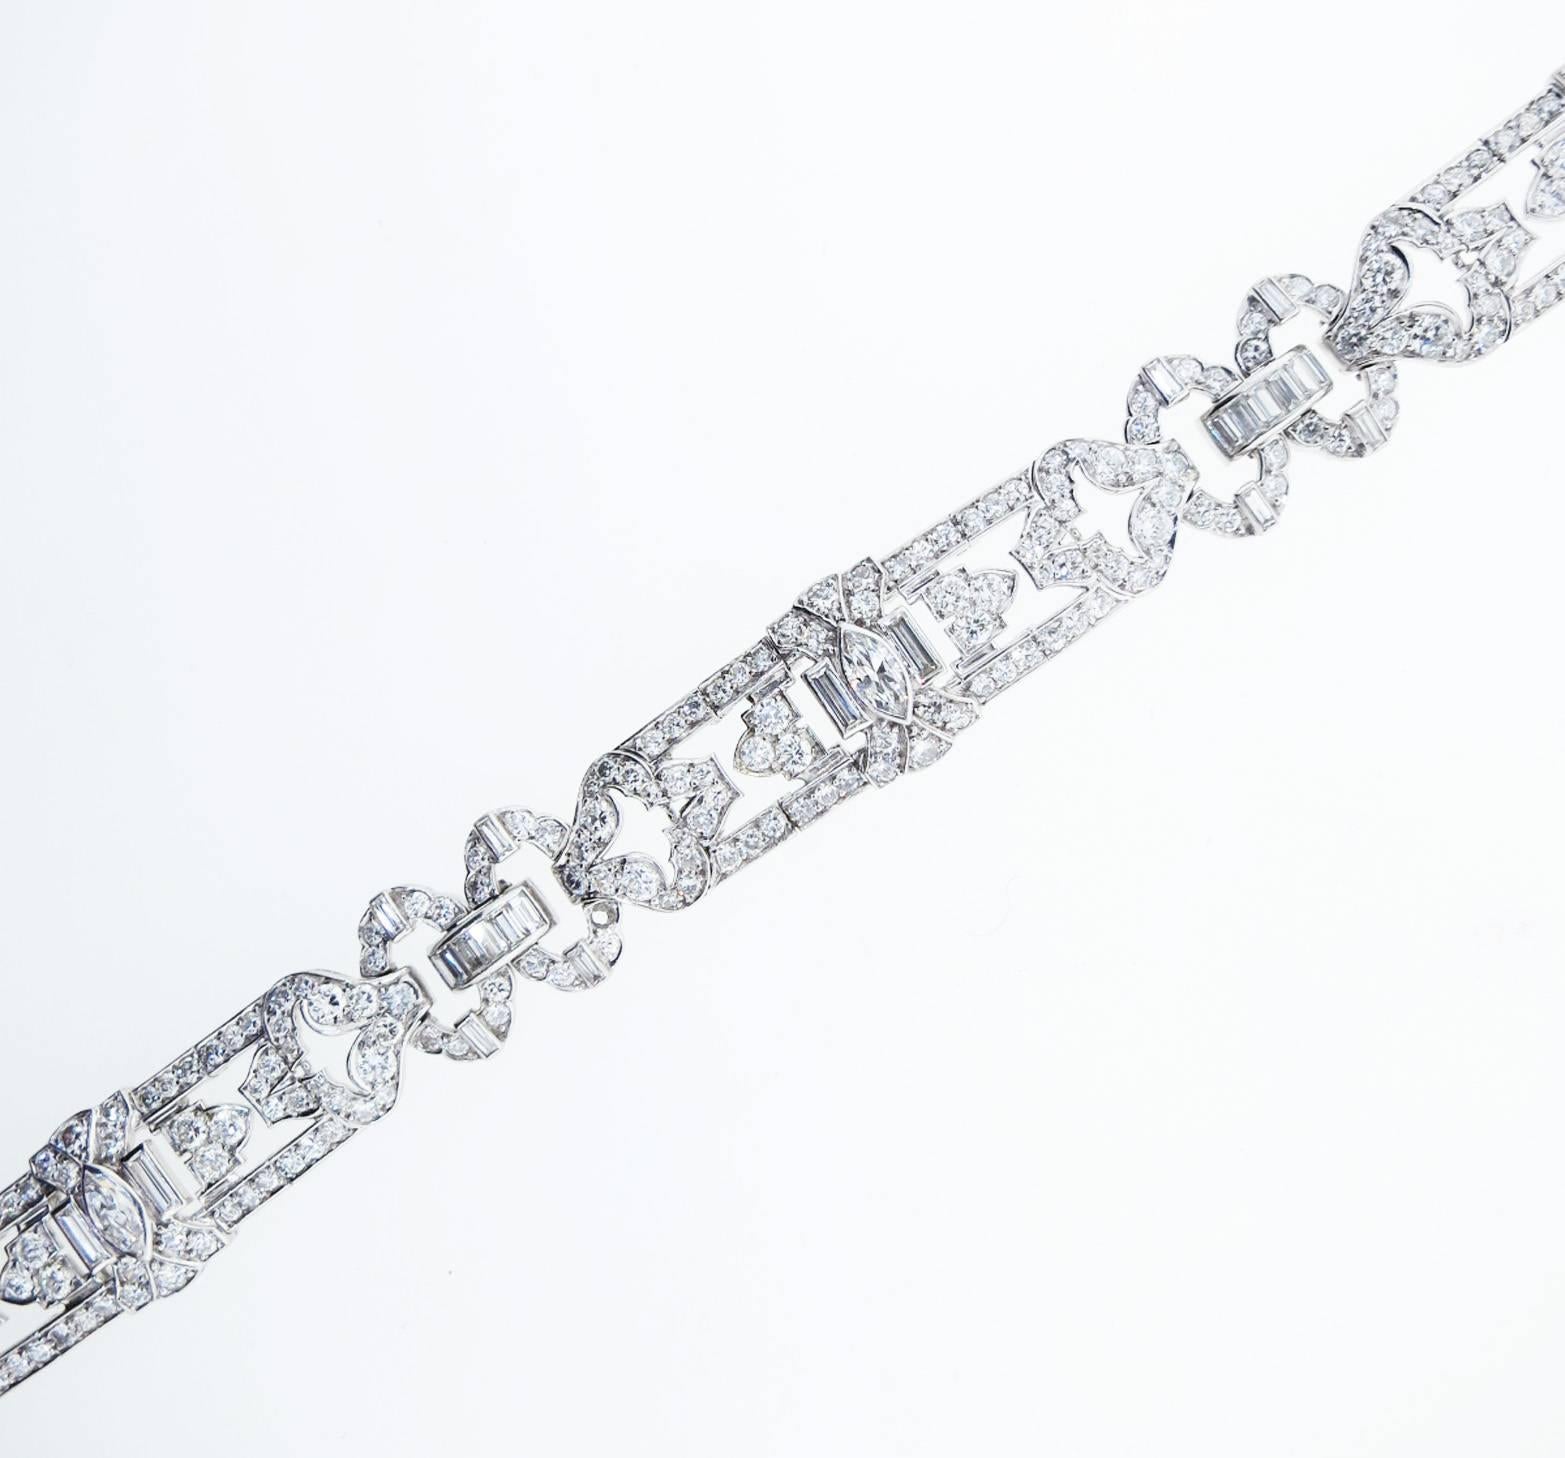  Platinum J.E. Caldwell diamond bracelet circa 1950. The bracelet is bead set in three sections  with 270 round Brilliant cut diamonds, 36 baguette cut diamonds and 3 marquise cut diamonds totaling approx 10cts. The diamonds grade VS clarity G-H